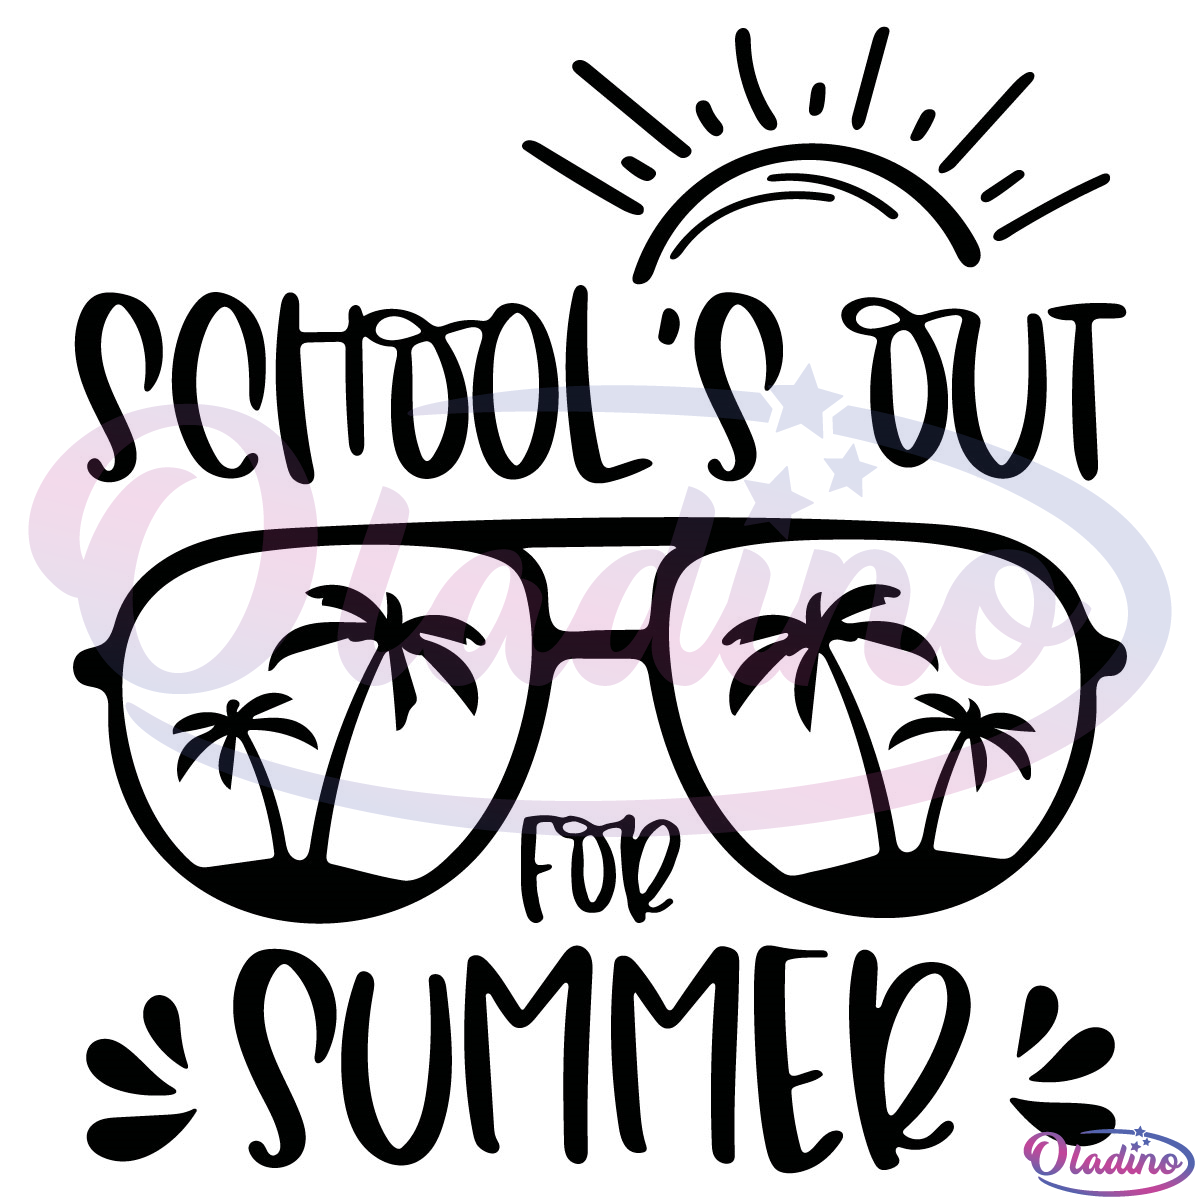 School Out For Summer Sunglasses Silhouette SVG Digital File